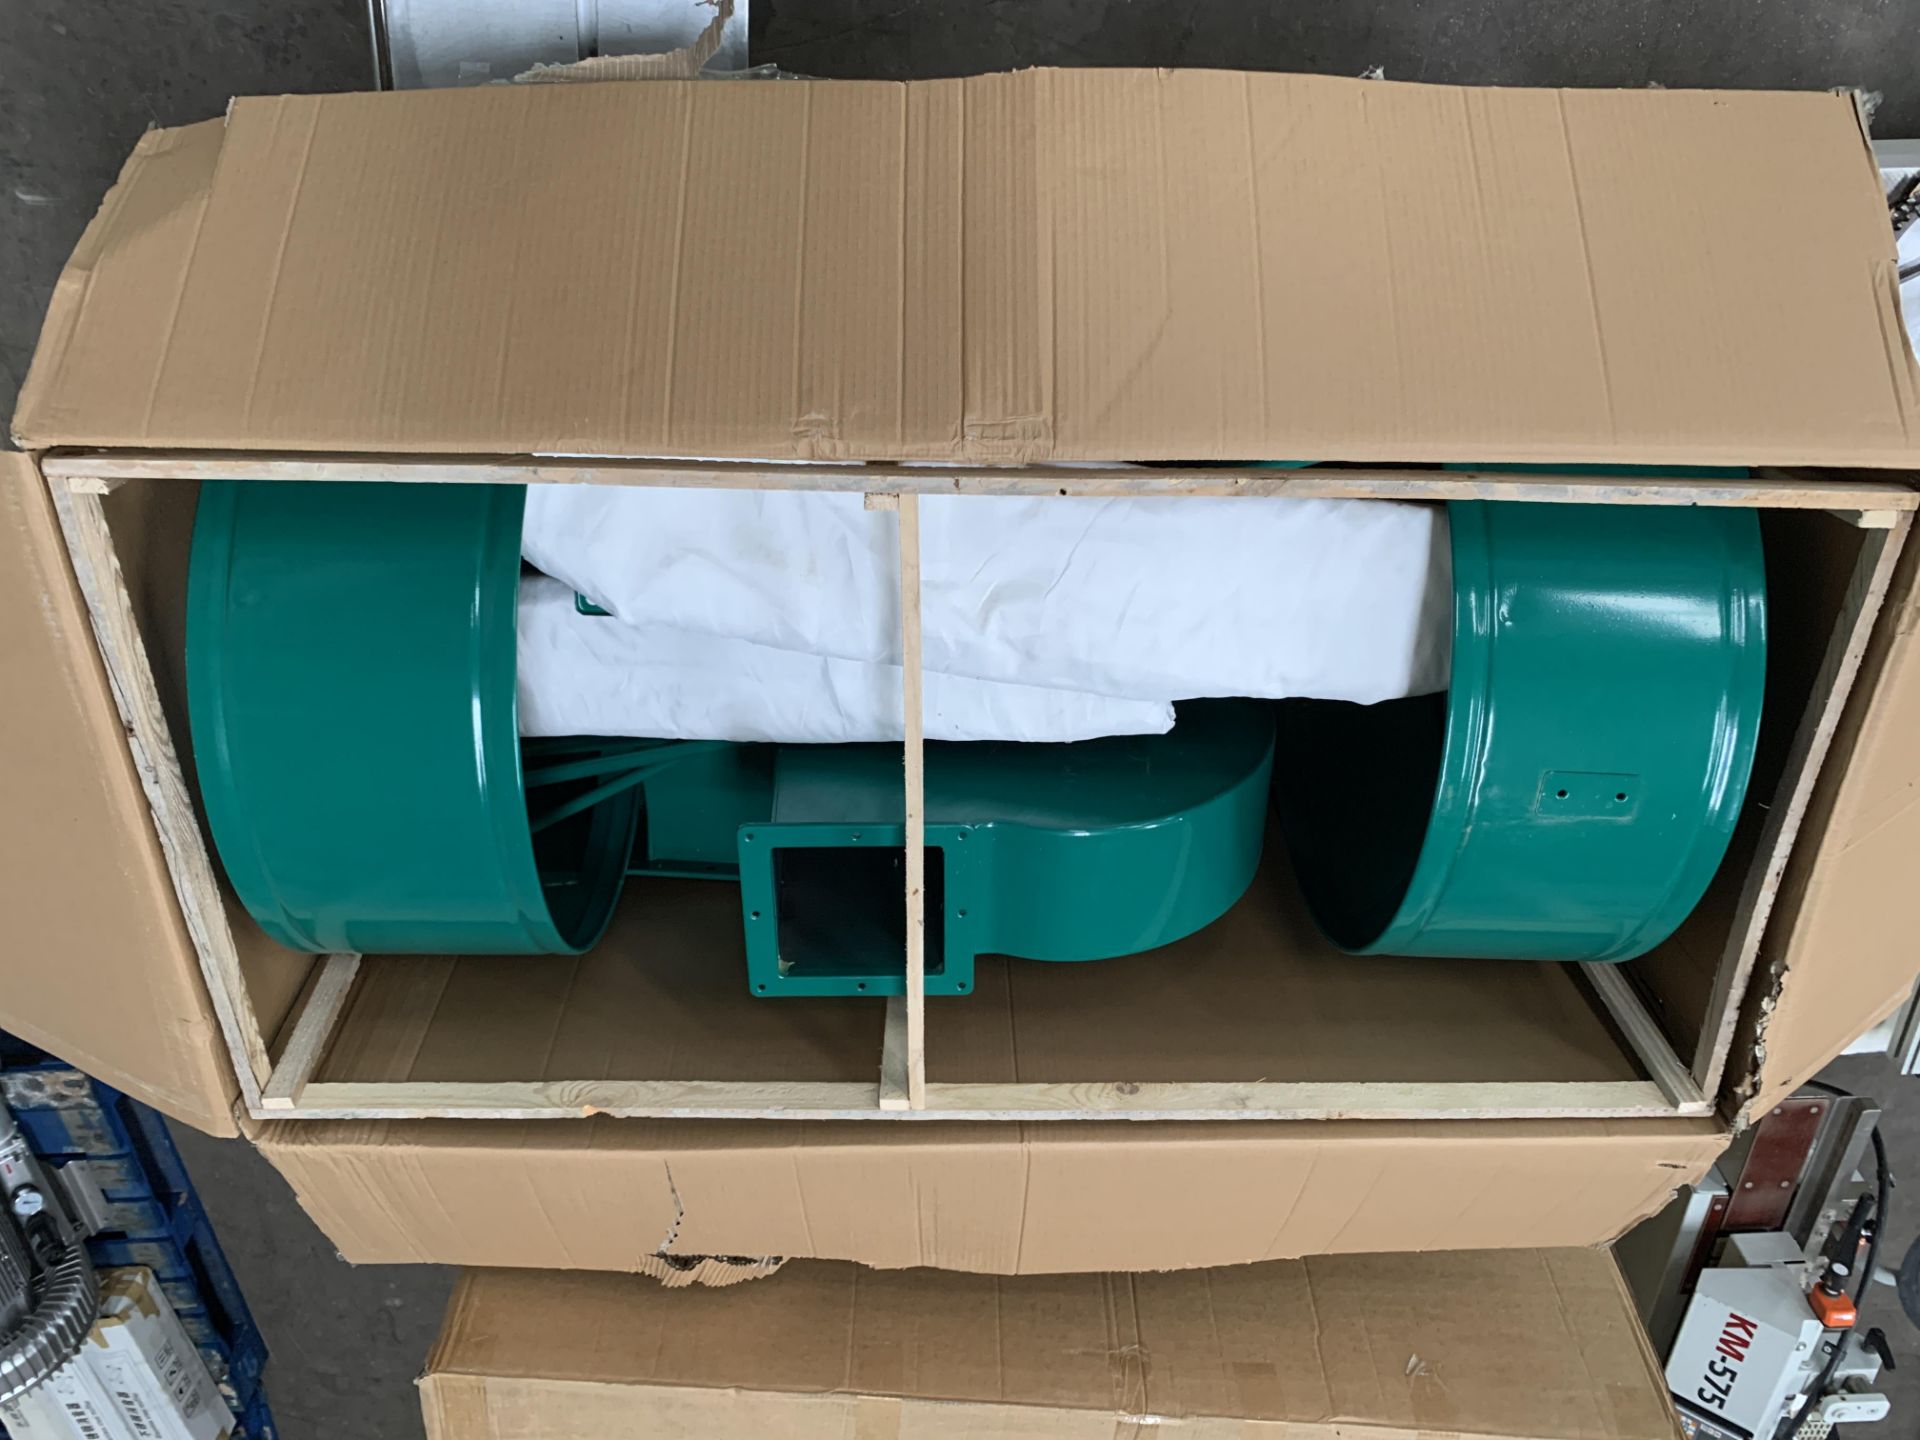 4kW Dust Collector - boxed and unused.